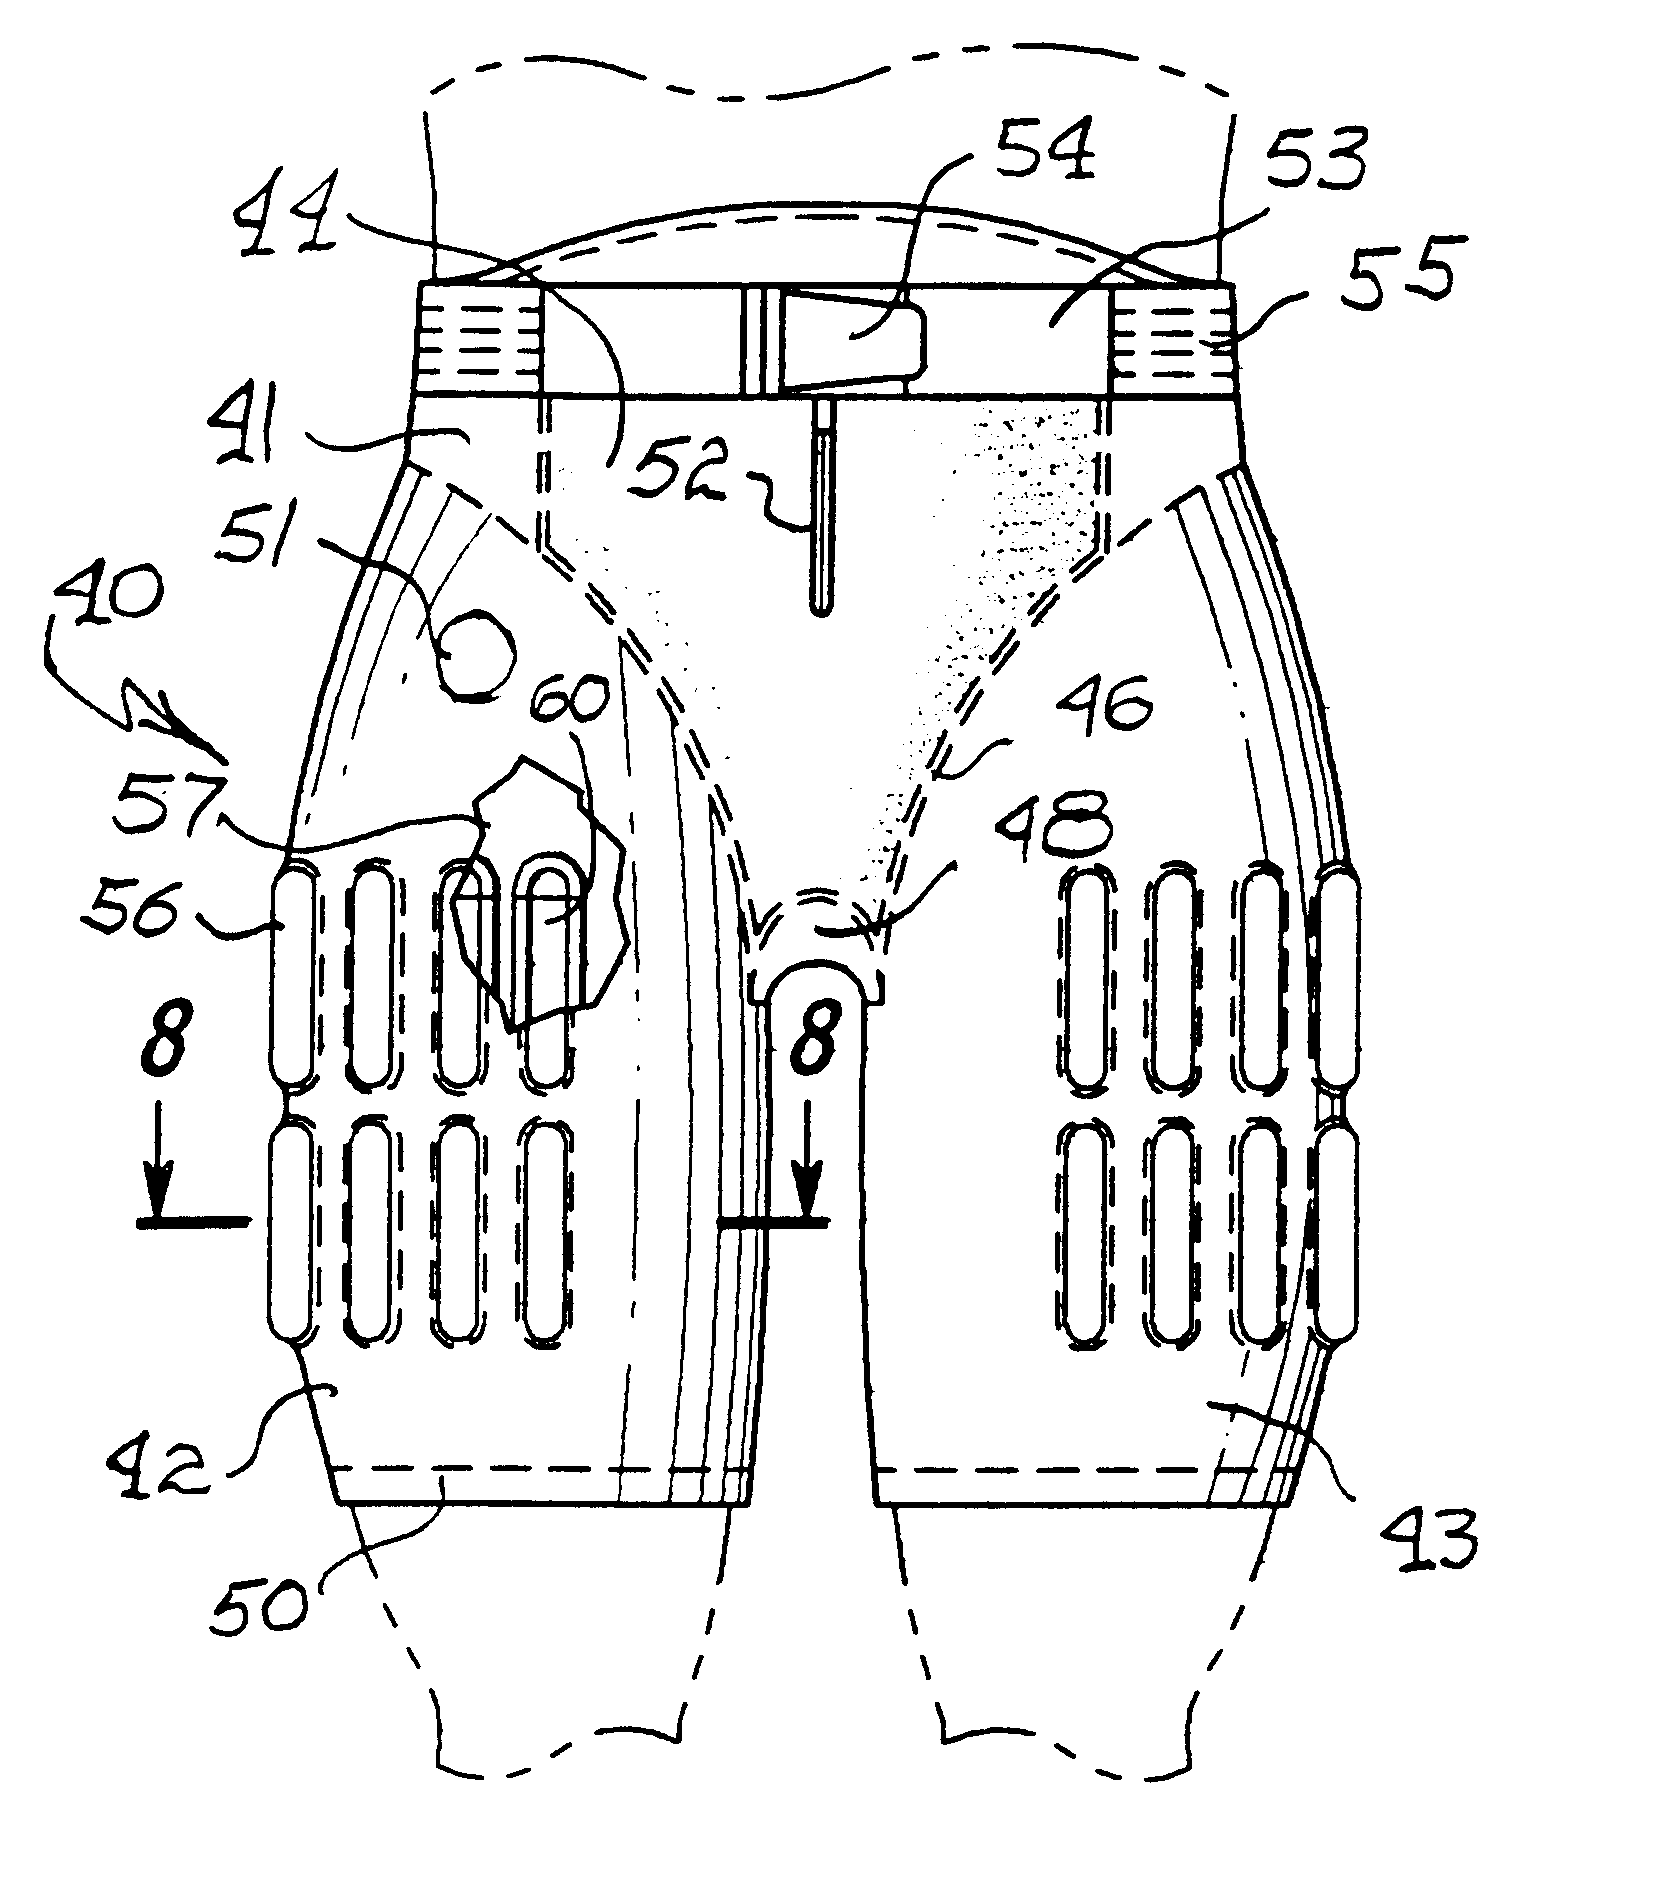 Weighted accessory for garments